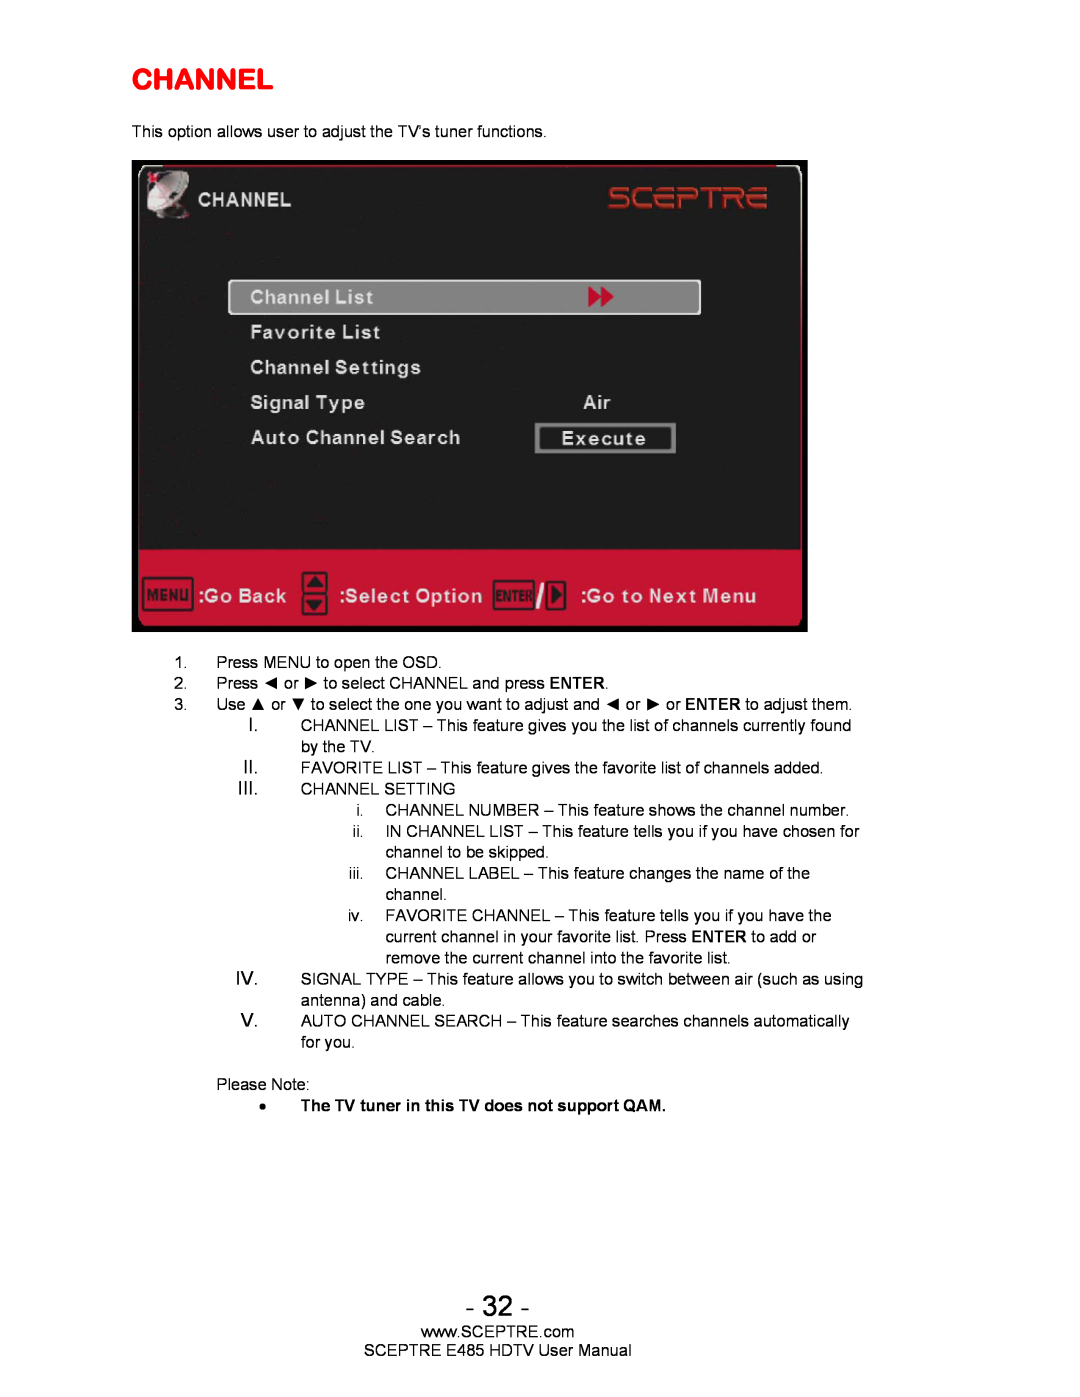 Sceptre Technologies E485 user manual Channel, The TV tuner in this TV does not support QAM 